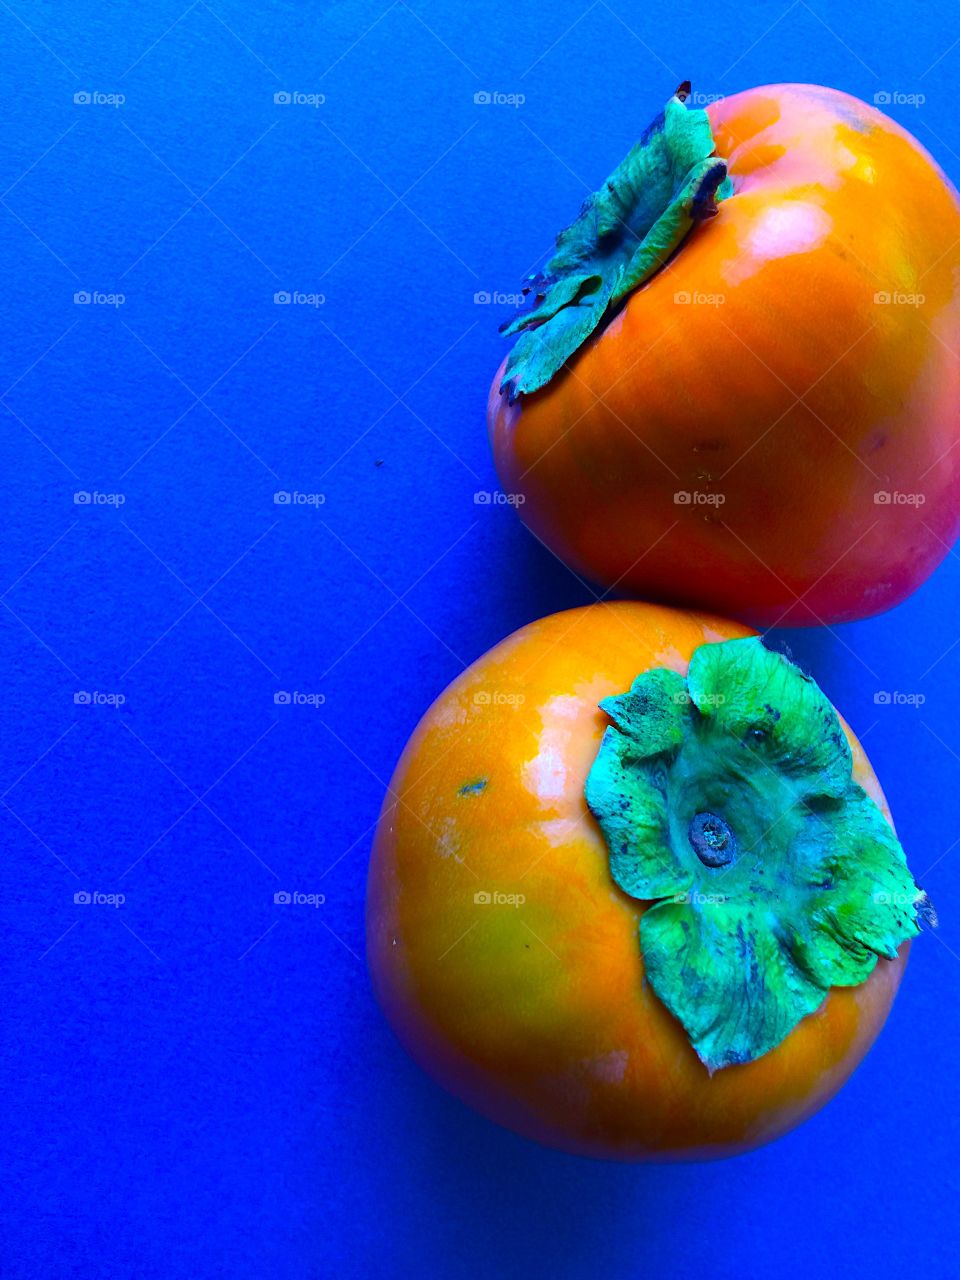 Two persimmons on blue background